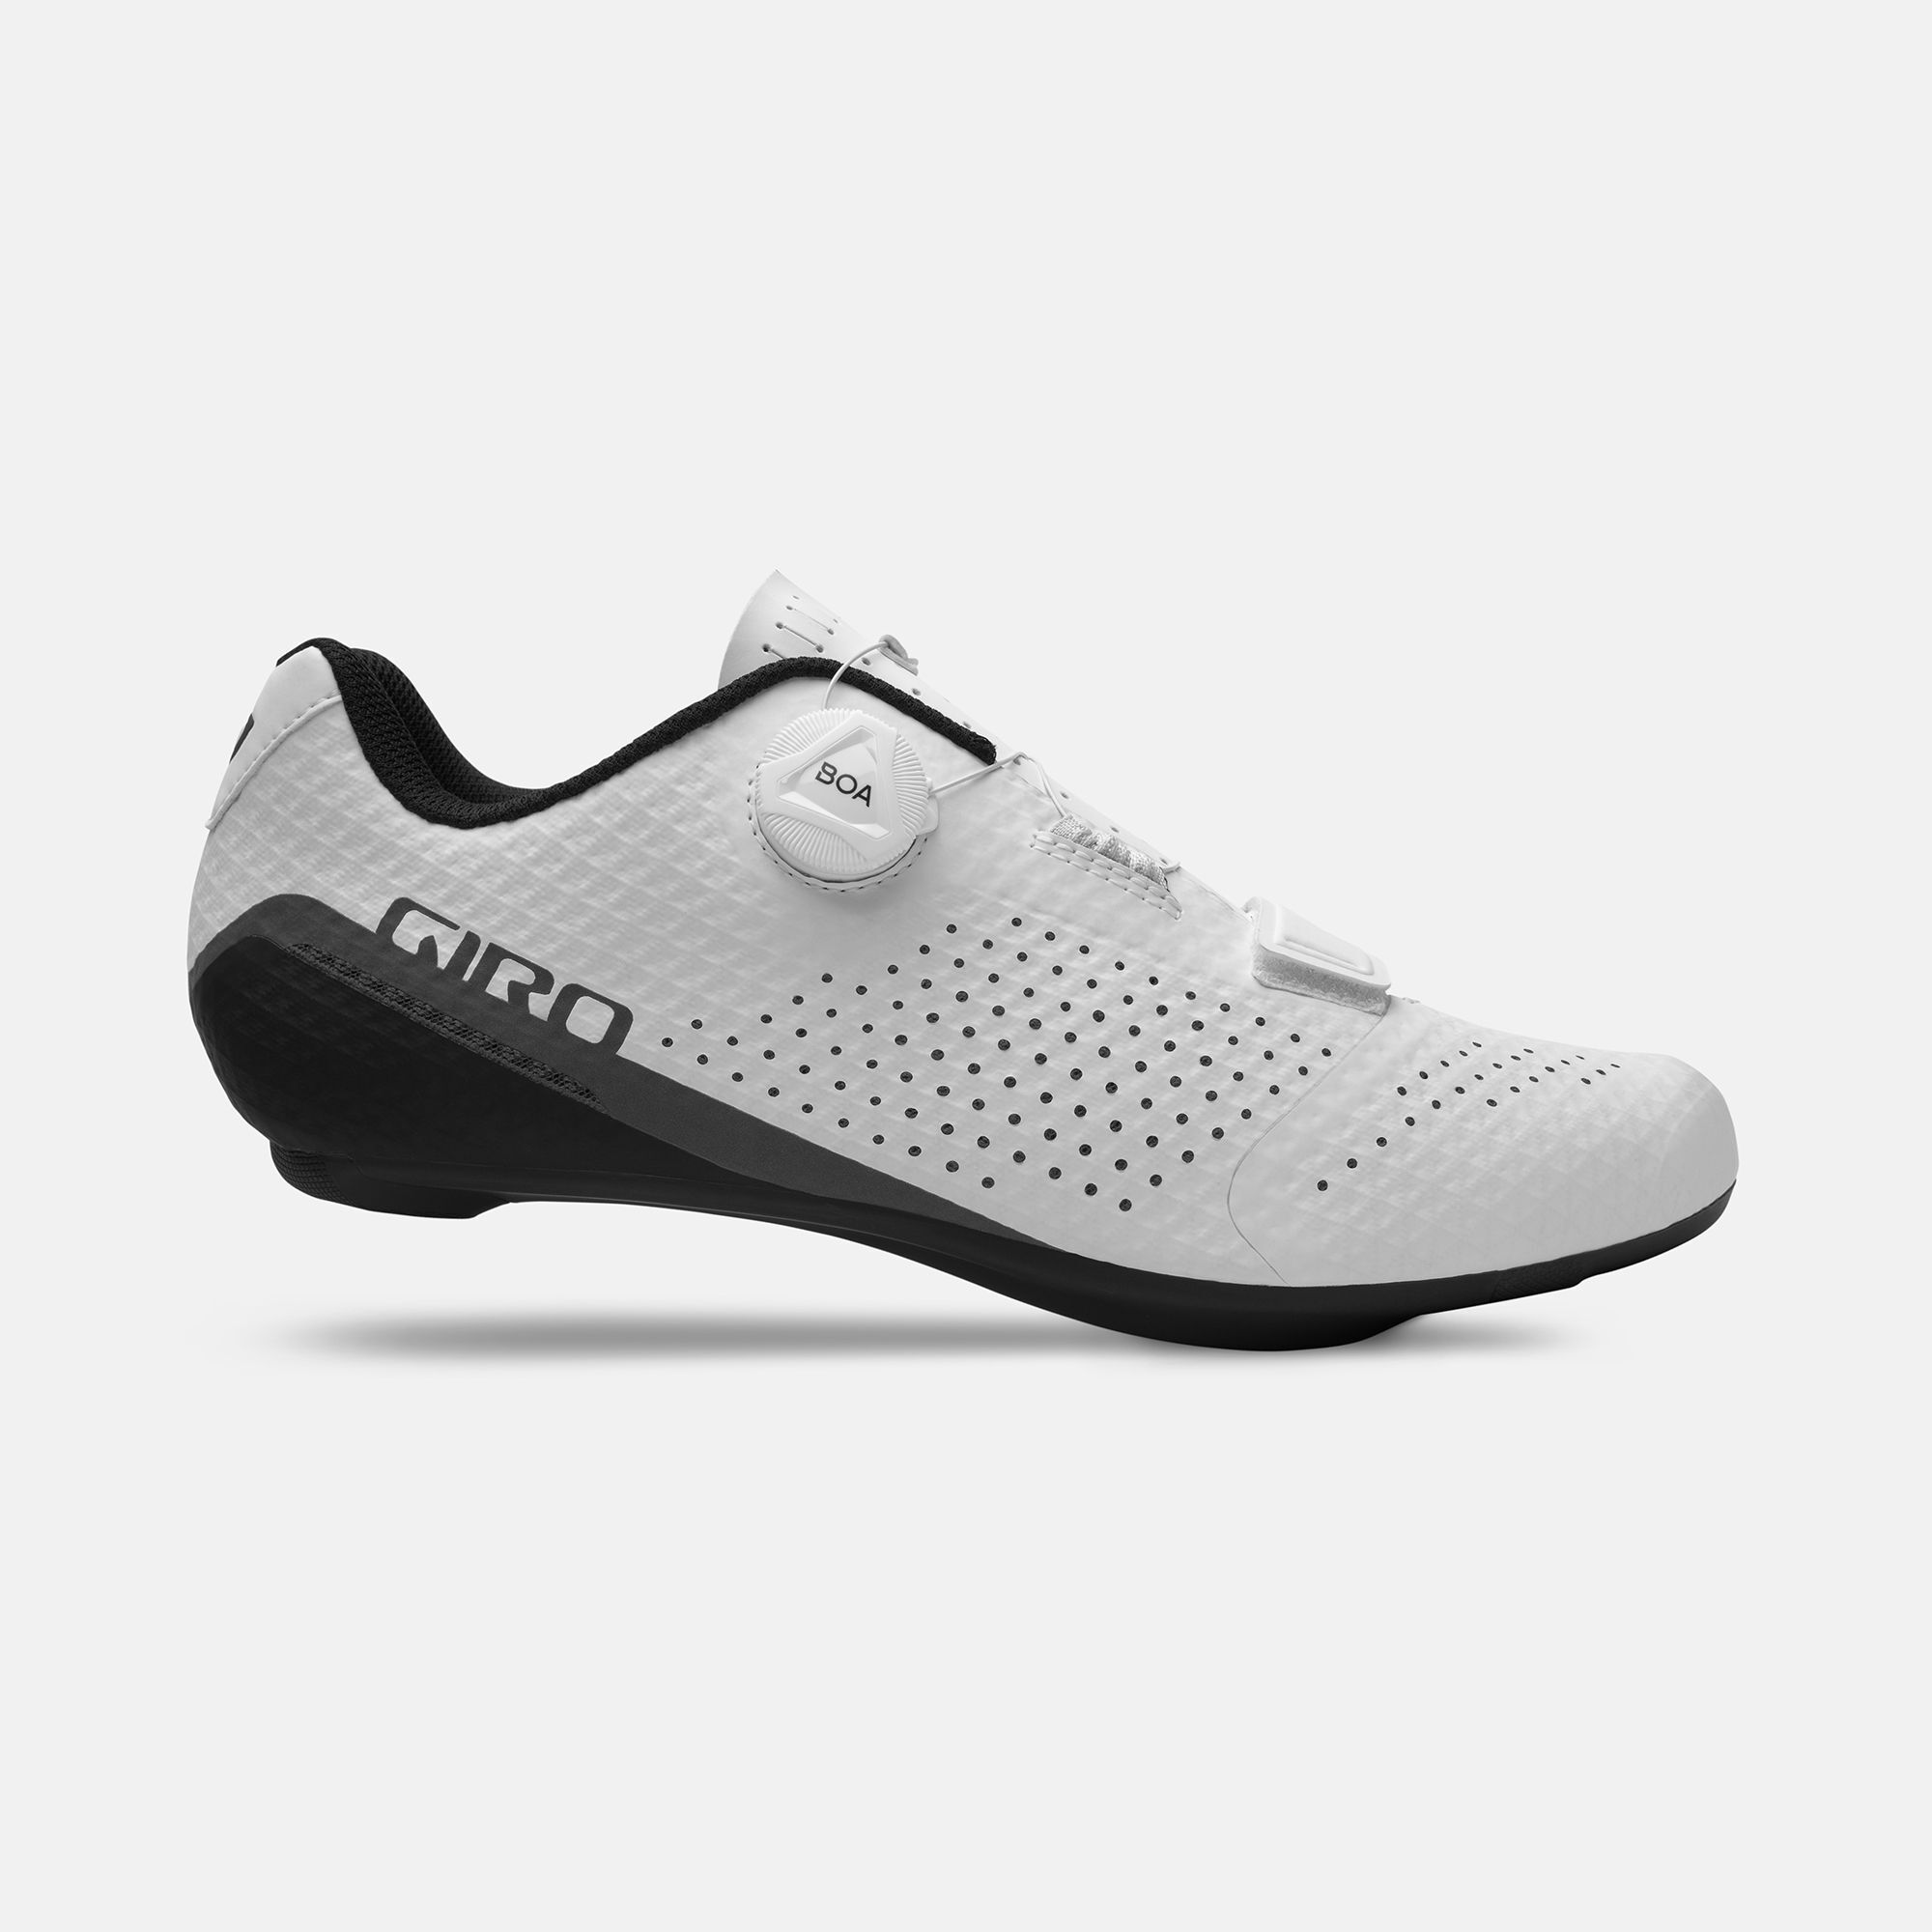 Shimano IC501 Unisex Indoor Cycling Spin Shoes, Black – woolyswheels.com.au